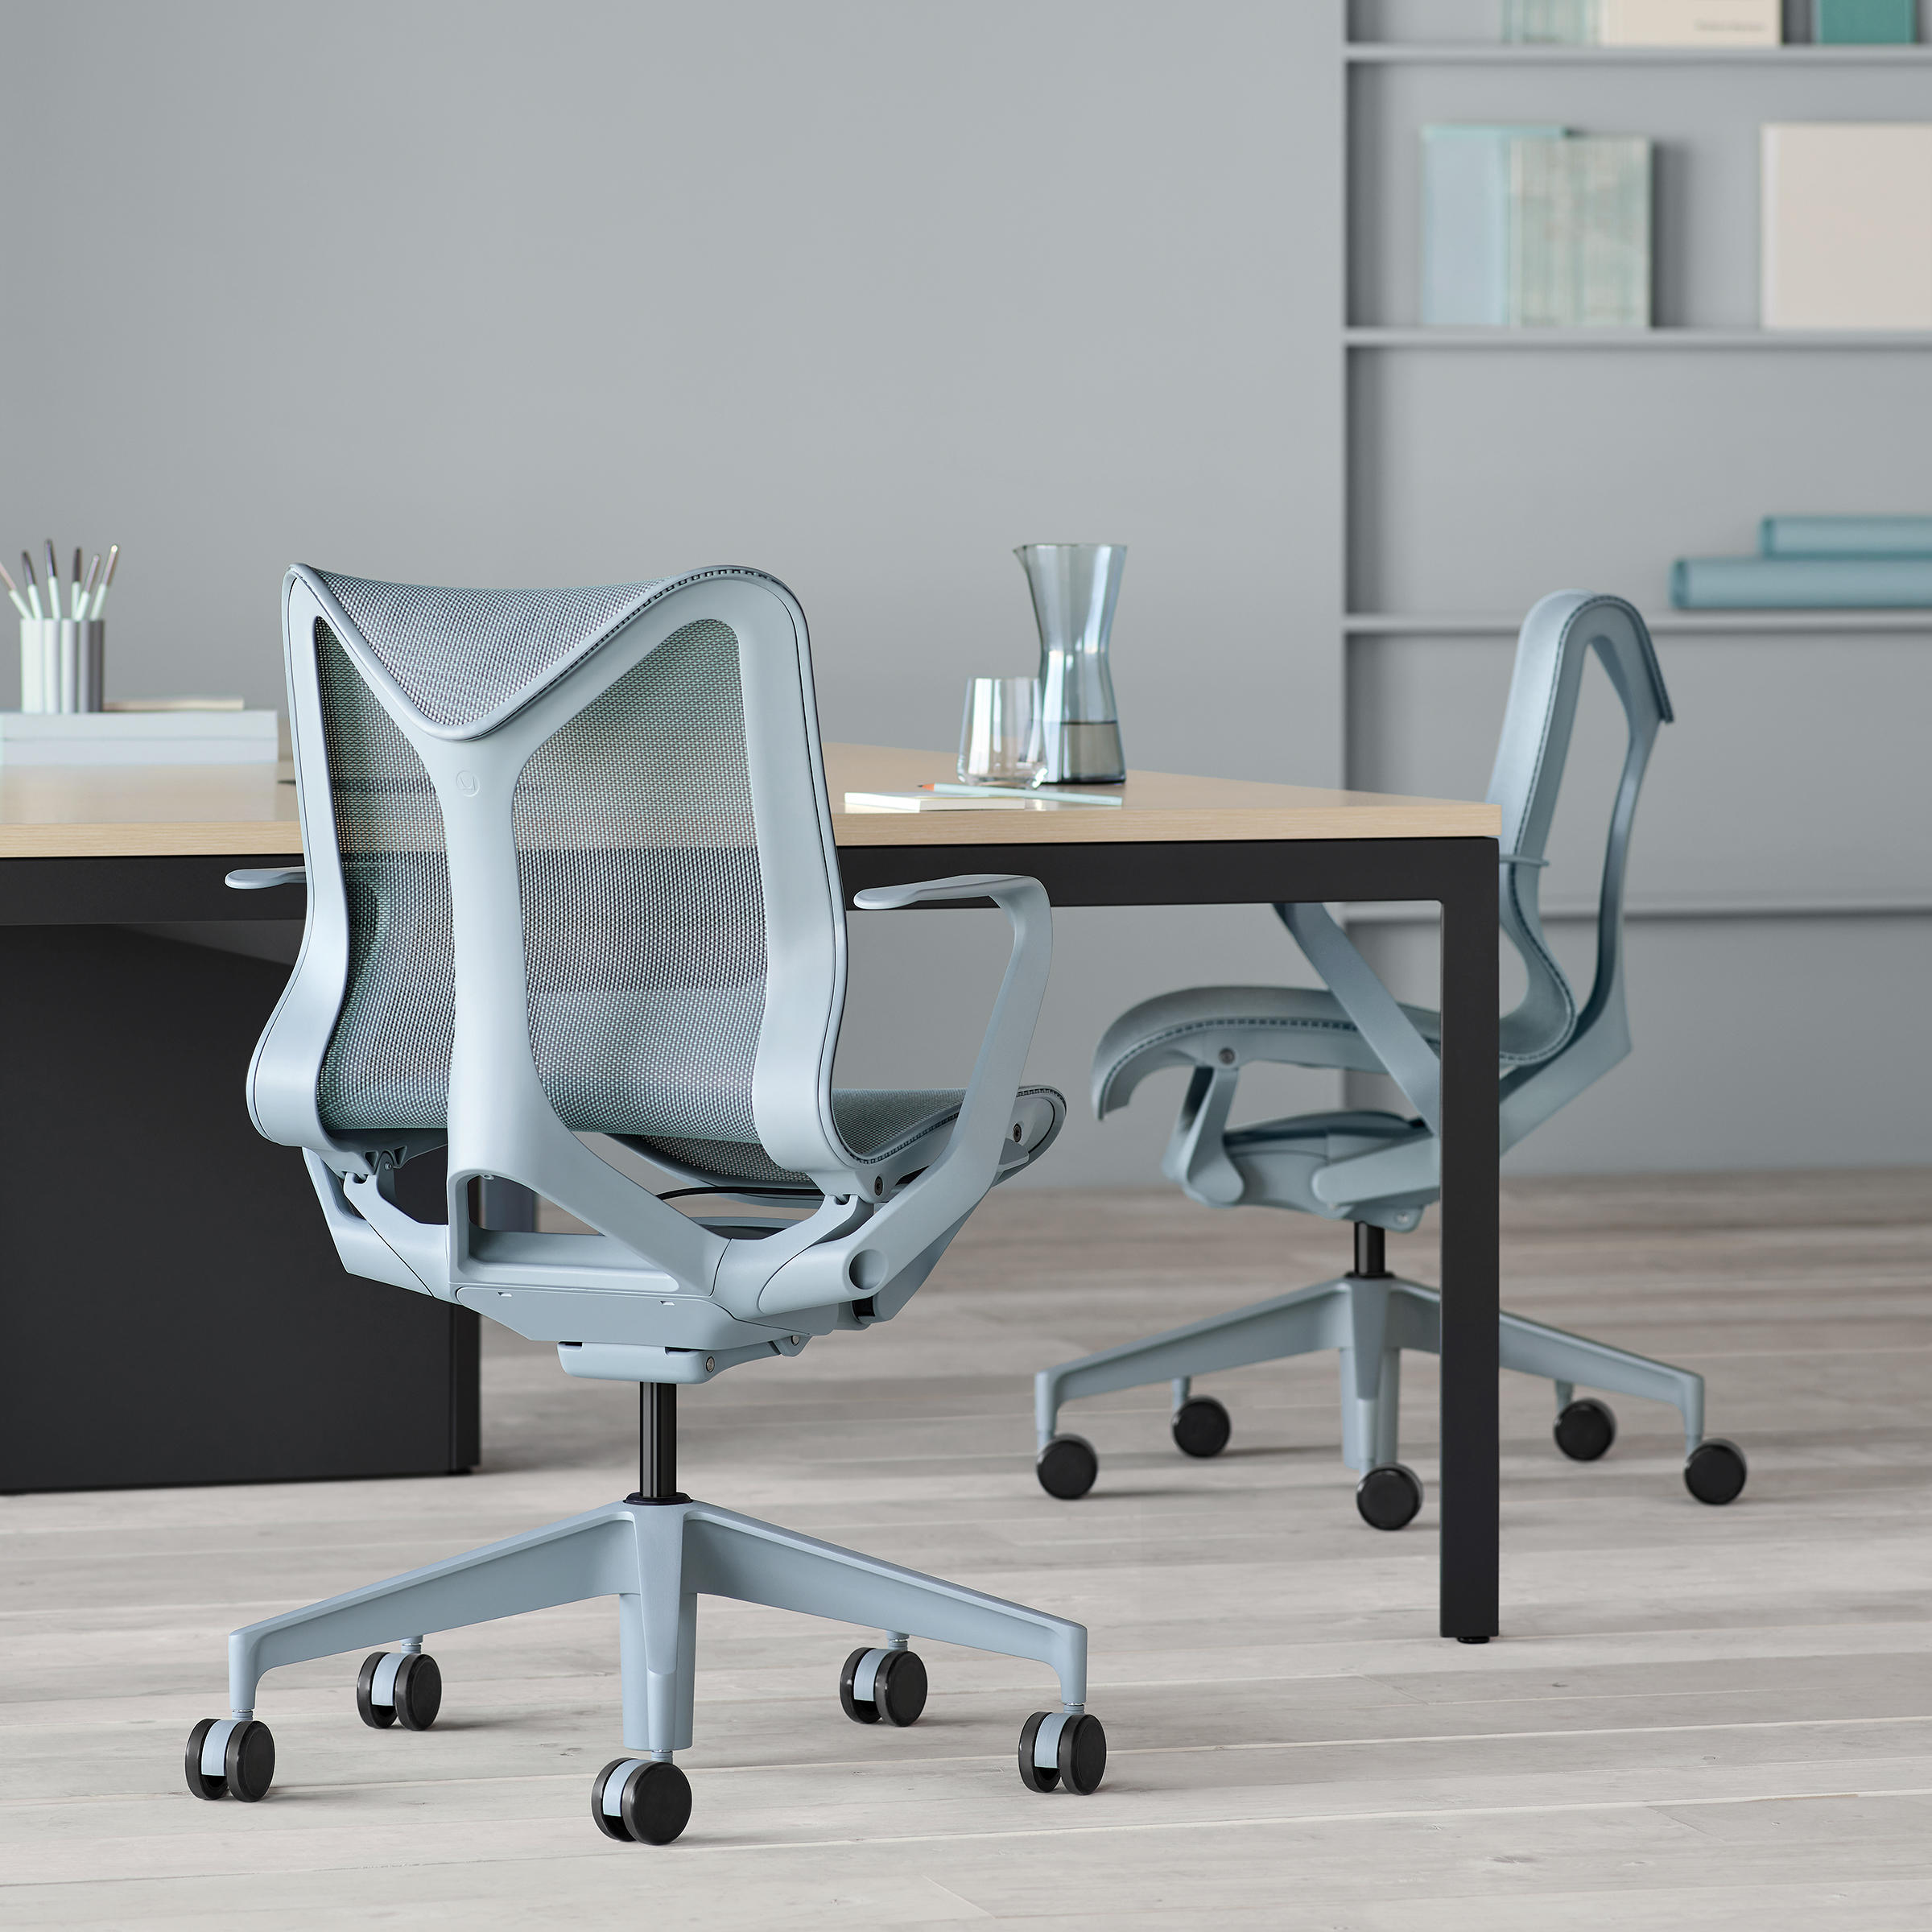 COSM HIGH BACK - Office chairs from Herman Miller | Architonic